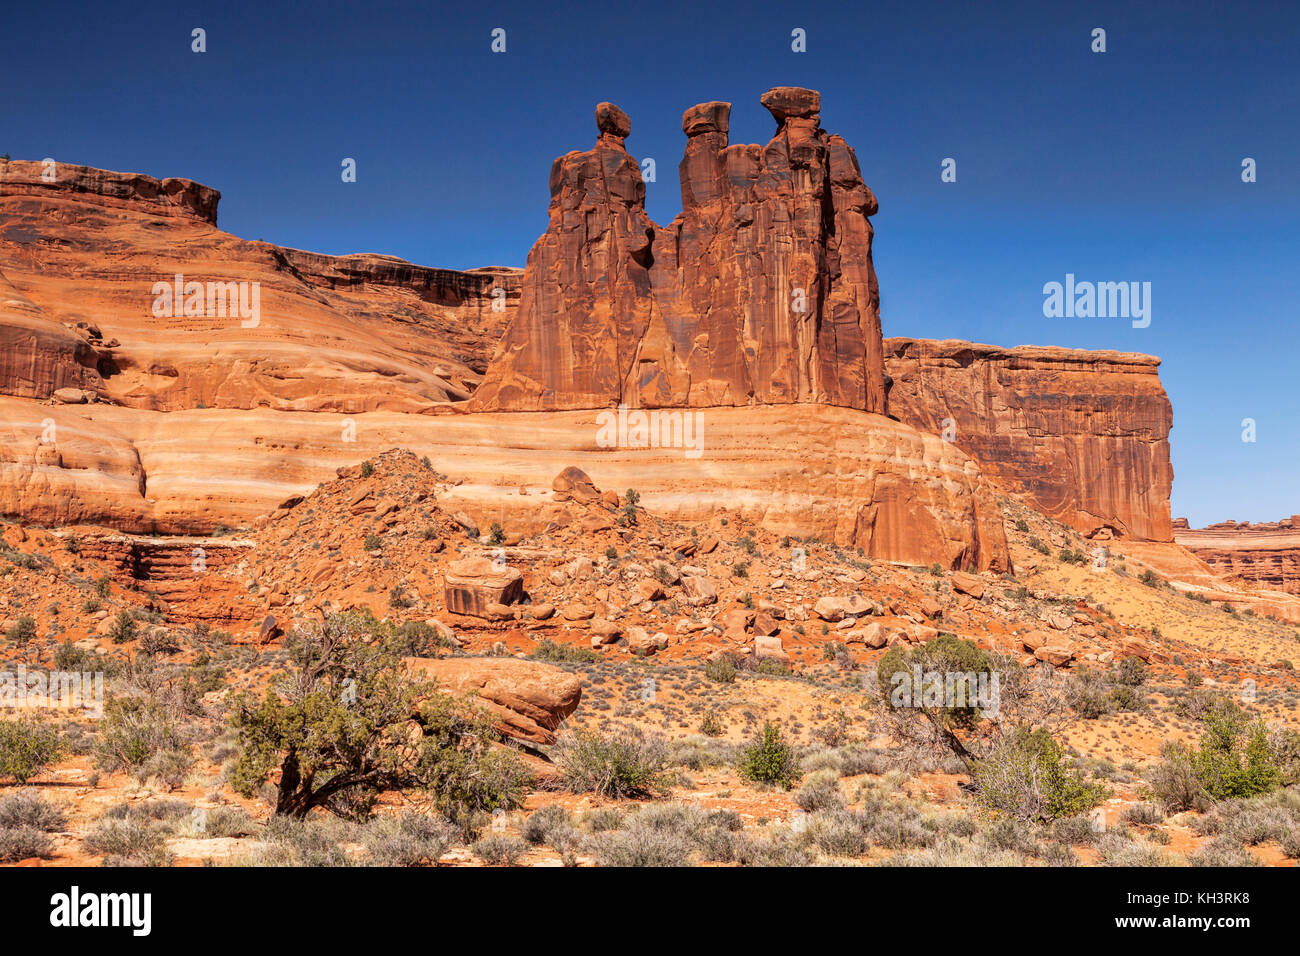 The eroded sandstone formations known as The Three Gossips, Park Avenue, Arches National Park, Utah, USA. Stock Photo